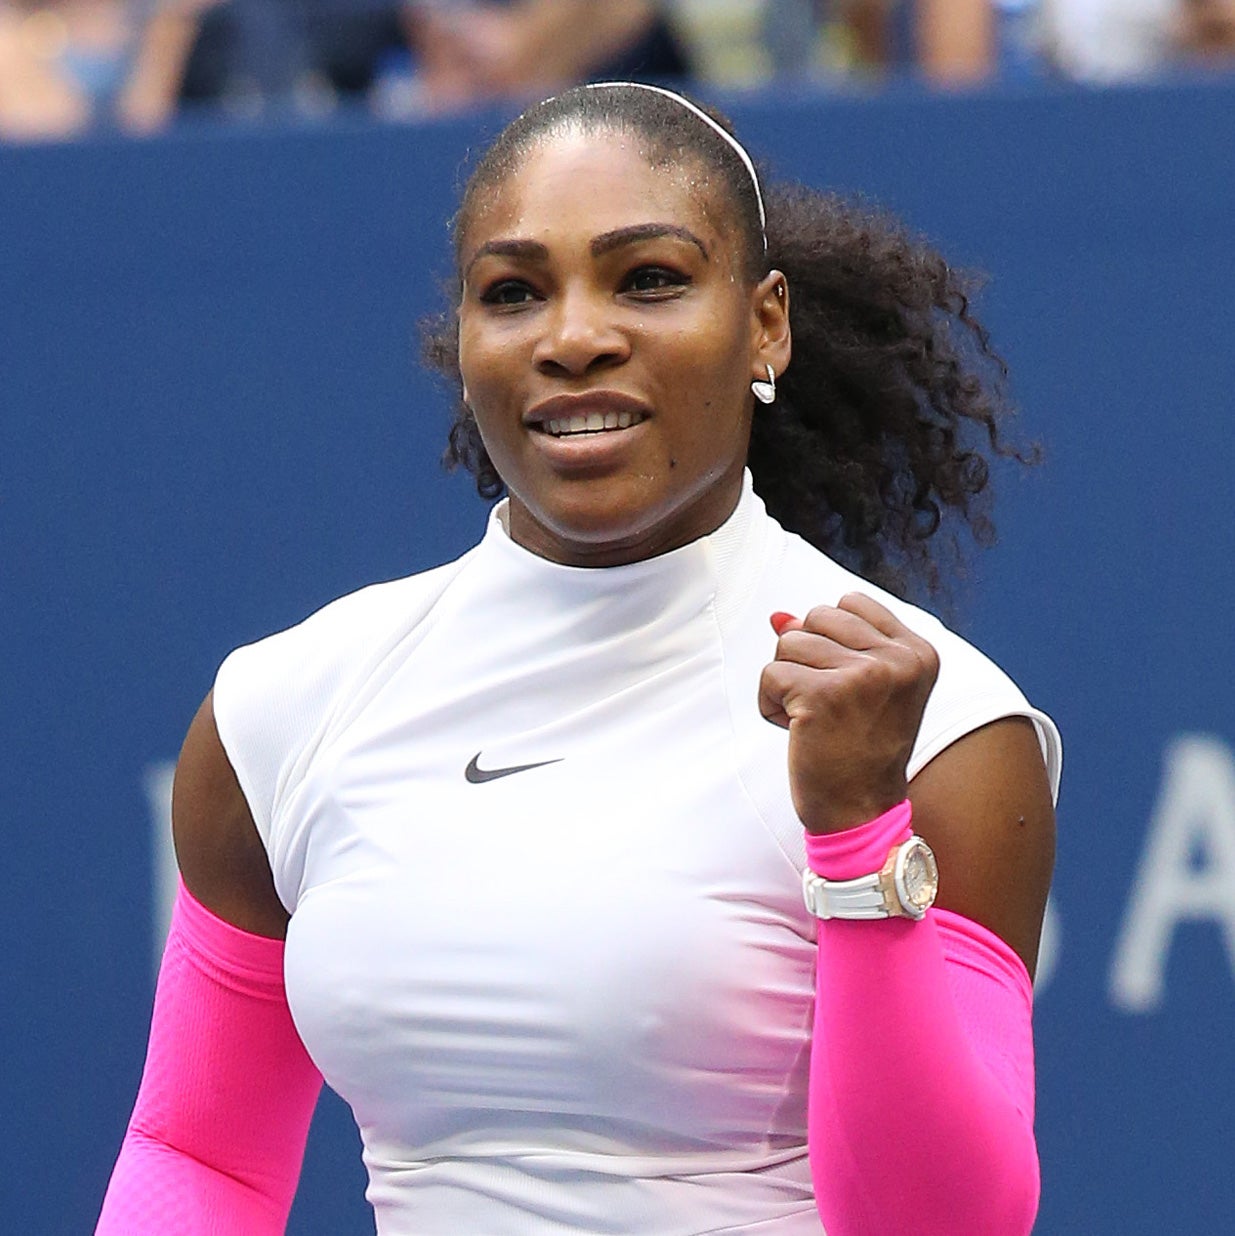 Serena Williams Speaks Out On Sexism In Sports: 'It Isn’t Easy To Have Someone Make A Comment About Your Body'
